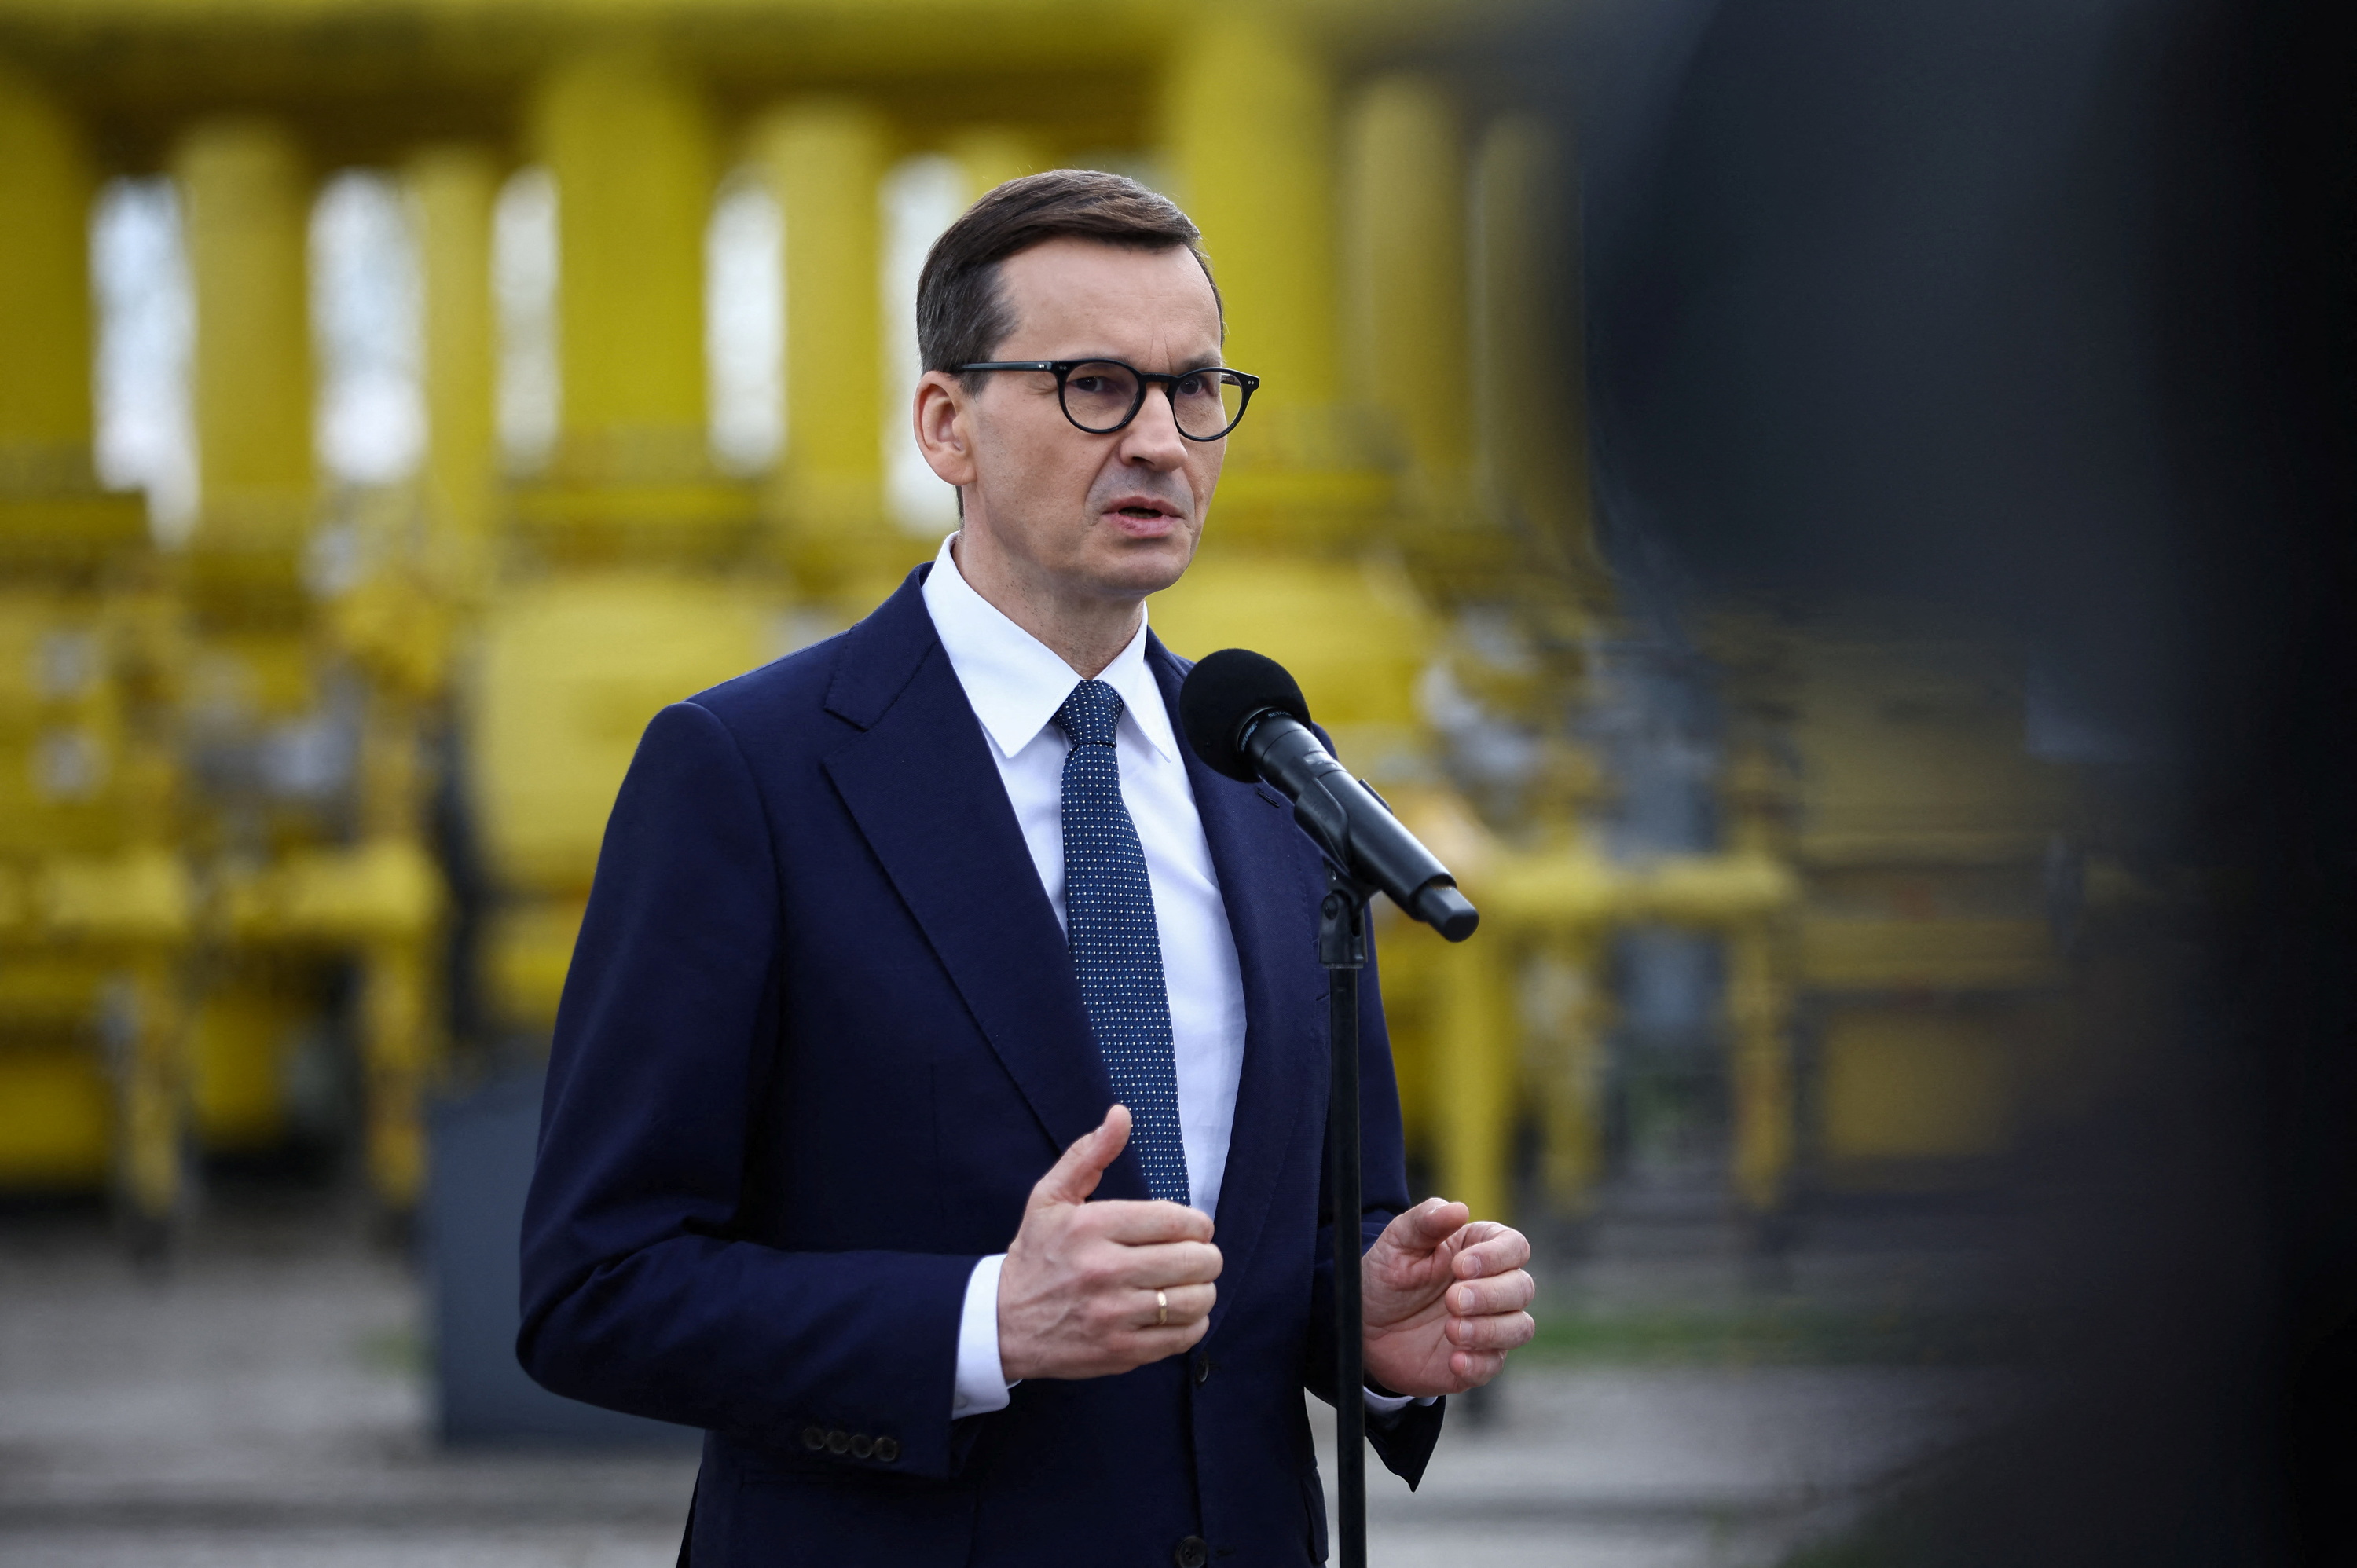 Poland's Prime Minister Mateusz Morawiecki speaks during a news conference near the gas installation at a Gaz-System gas compressor station in Rembelszczyzna